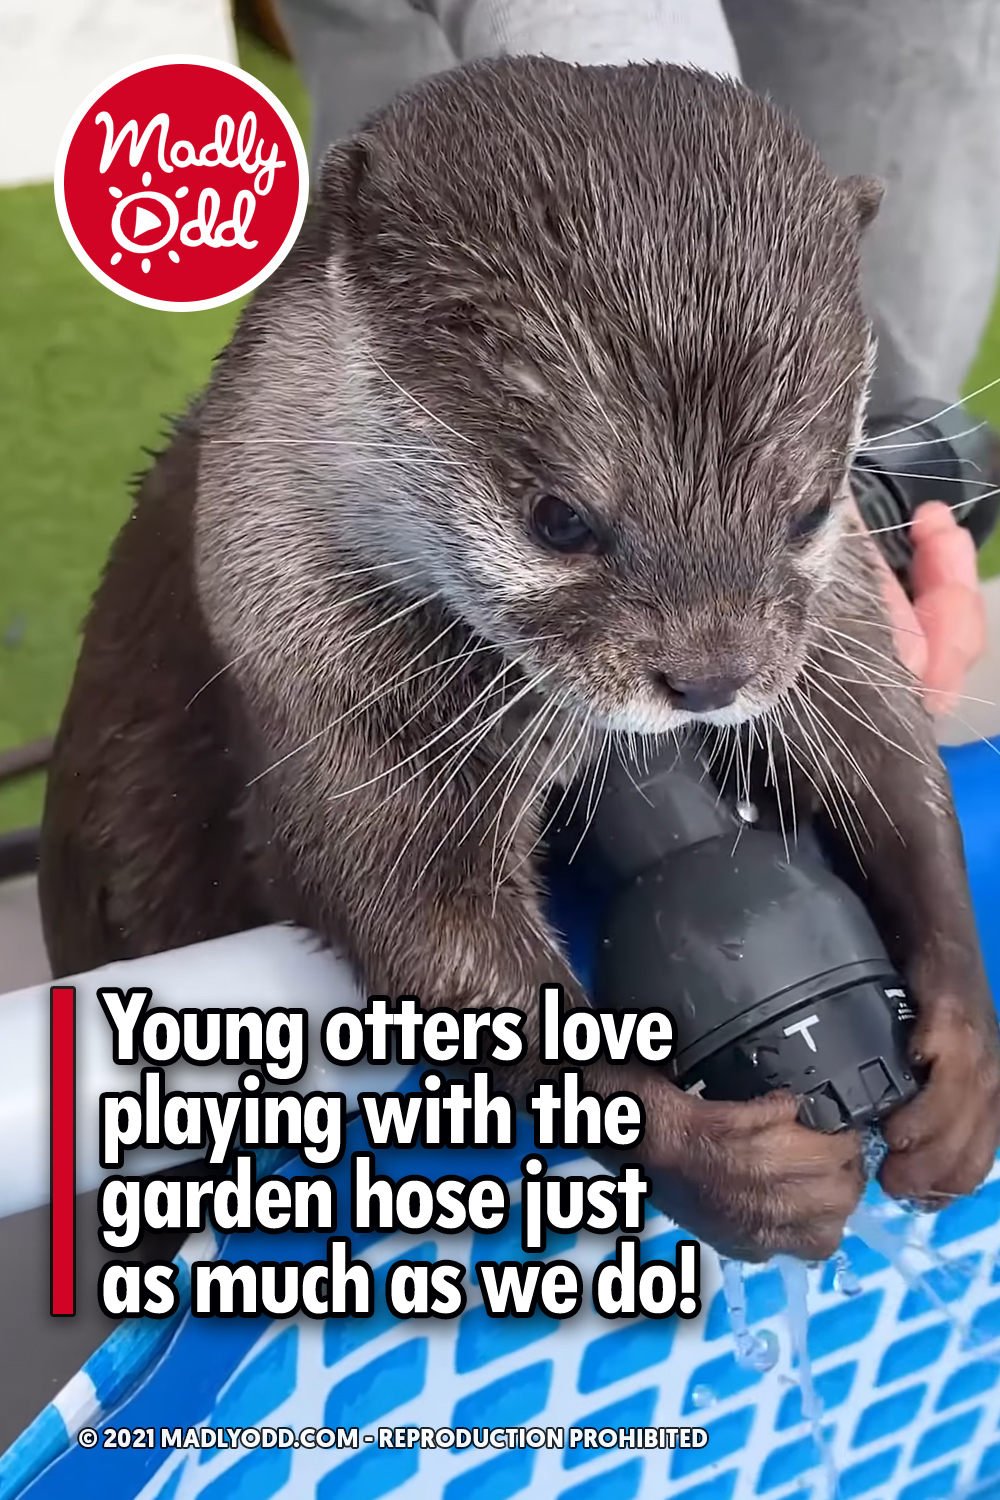 Young otters love playing with the garden hose just as much as we do!